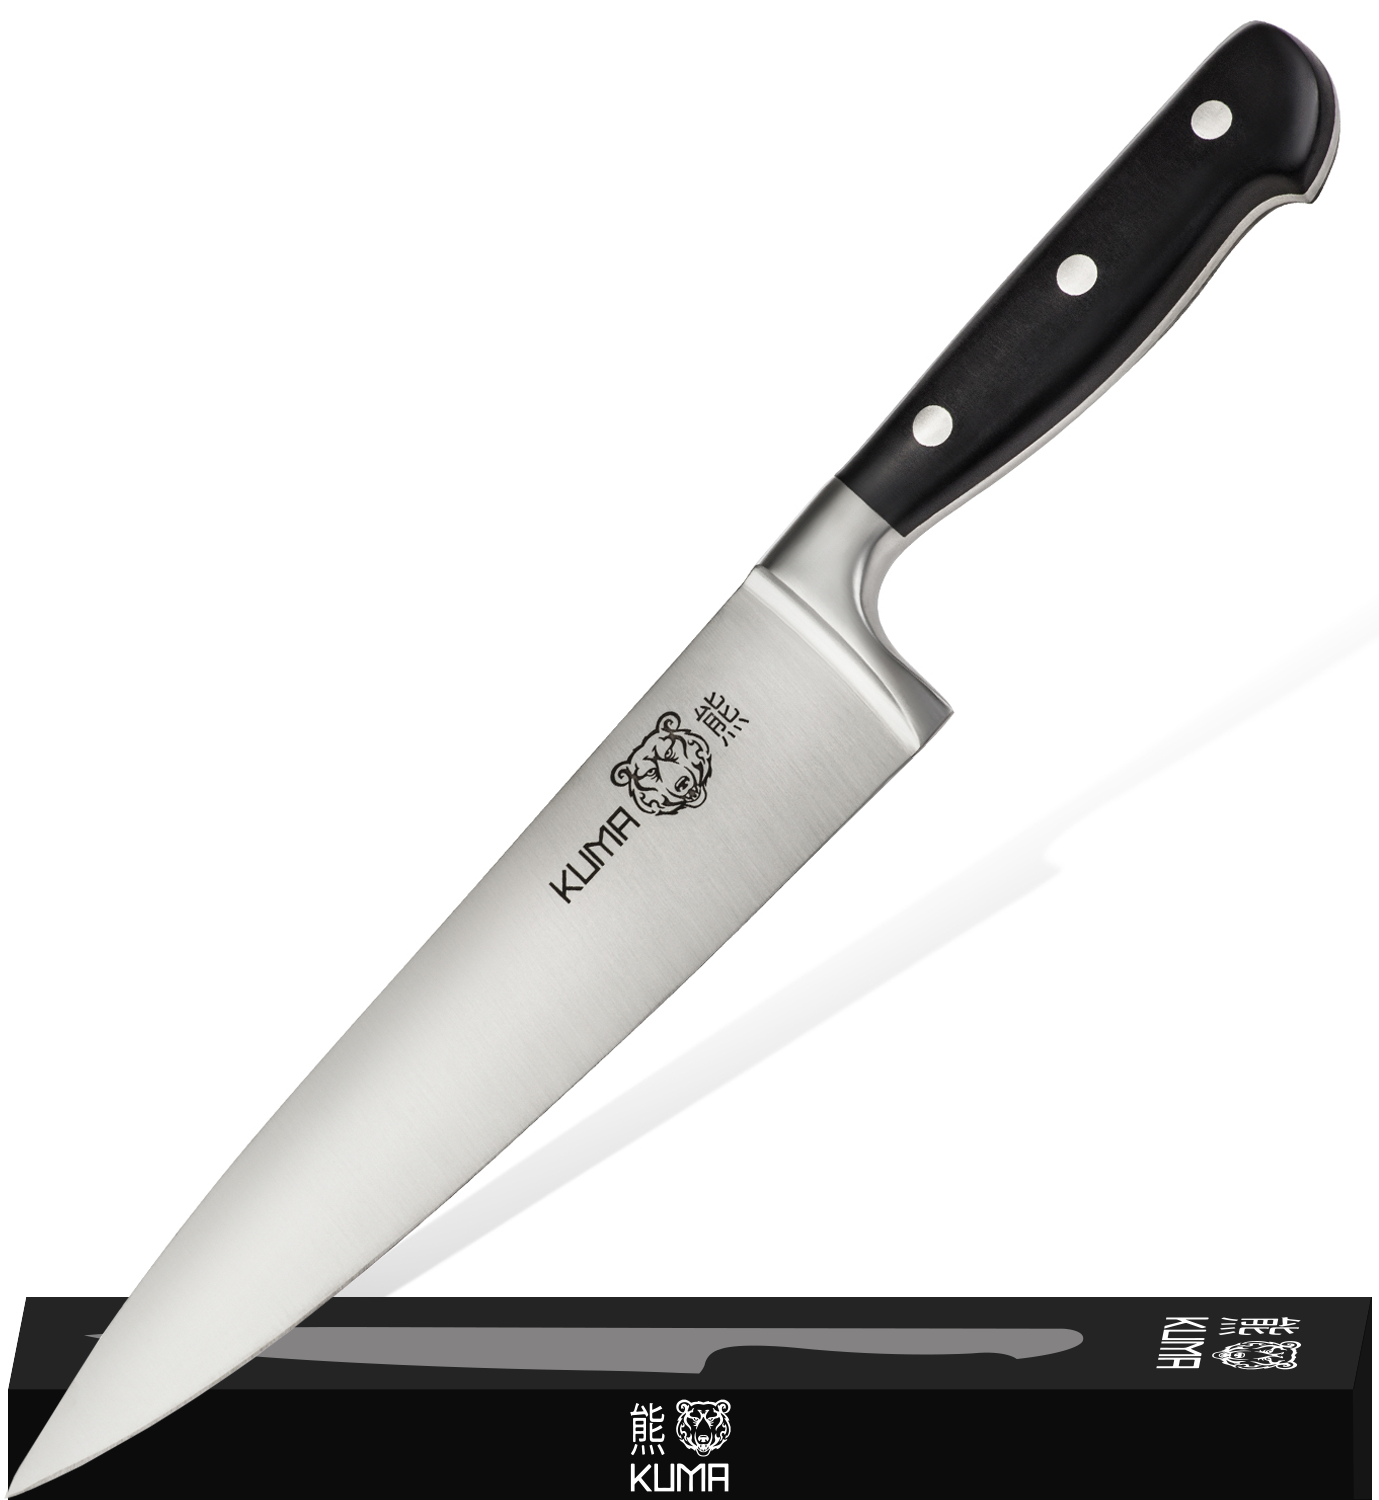 Material | The 8 Knife | Japanese Stainless Steel Knife | 8 inch Chef's Knife in Green | Kitchen Tools